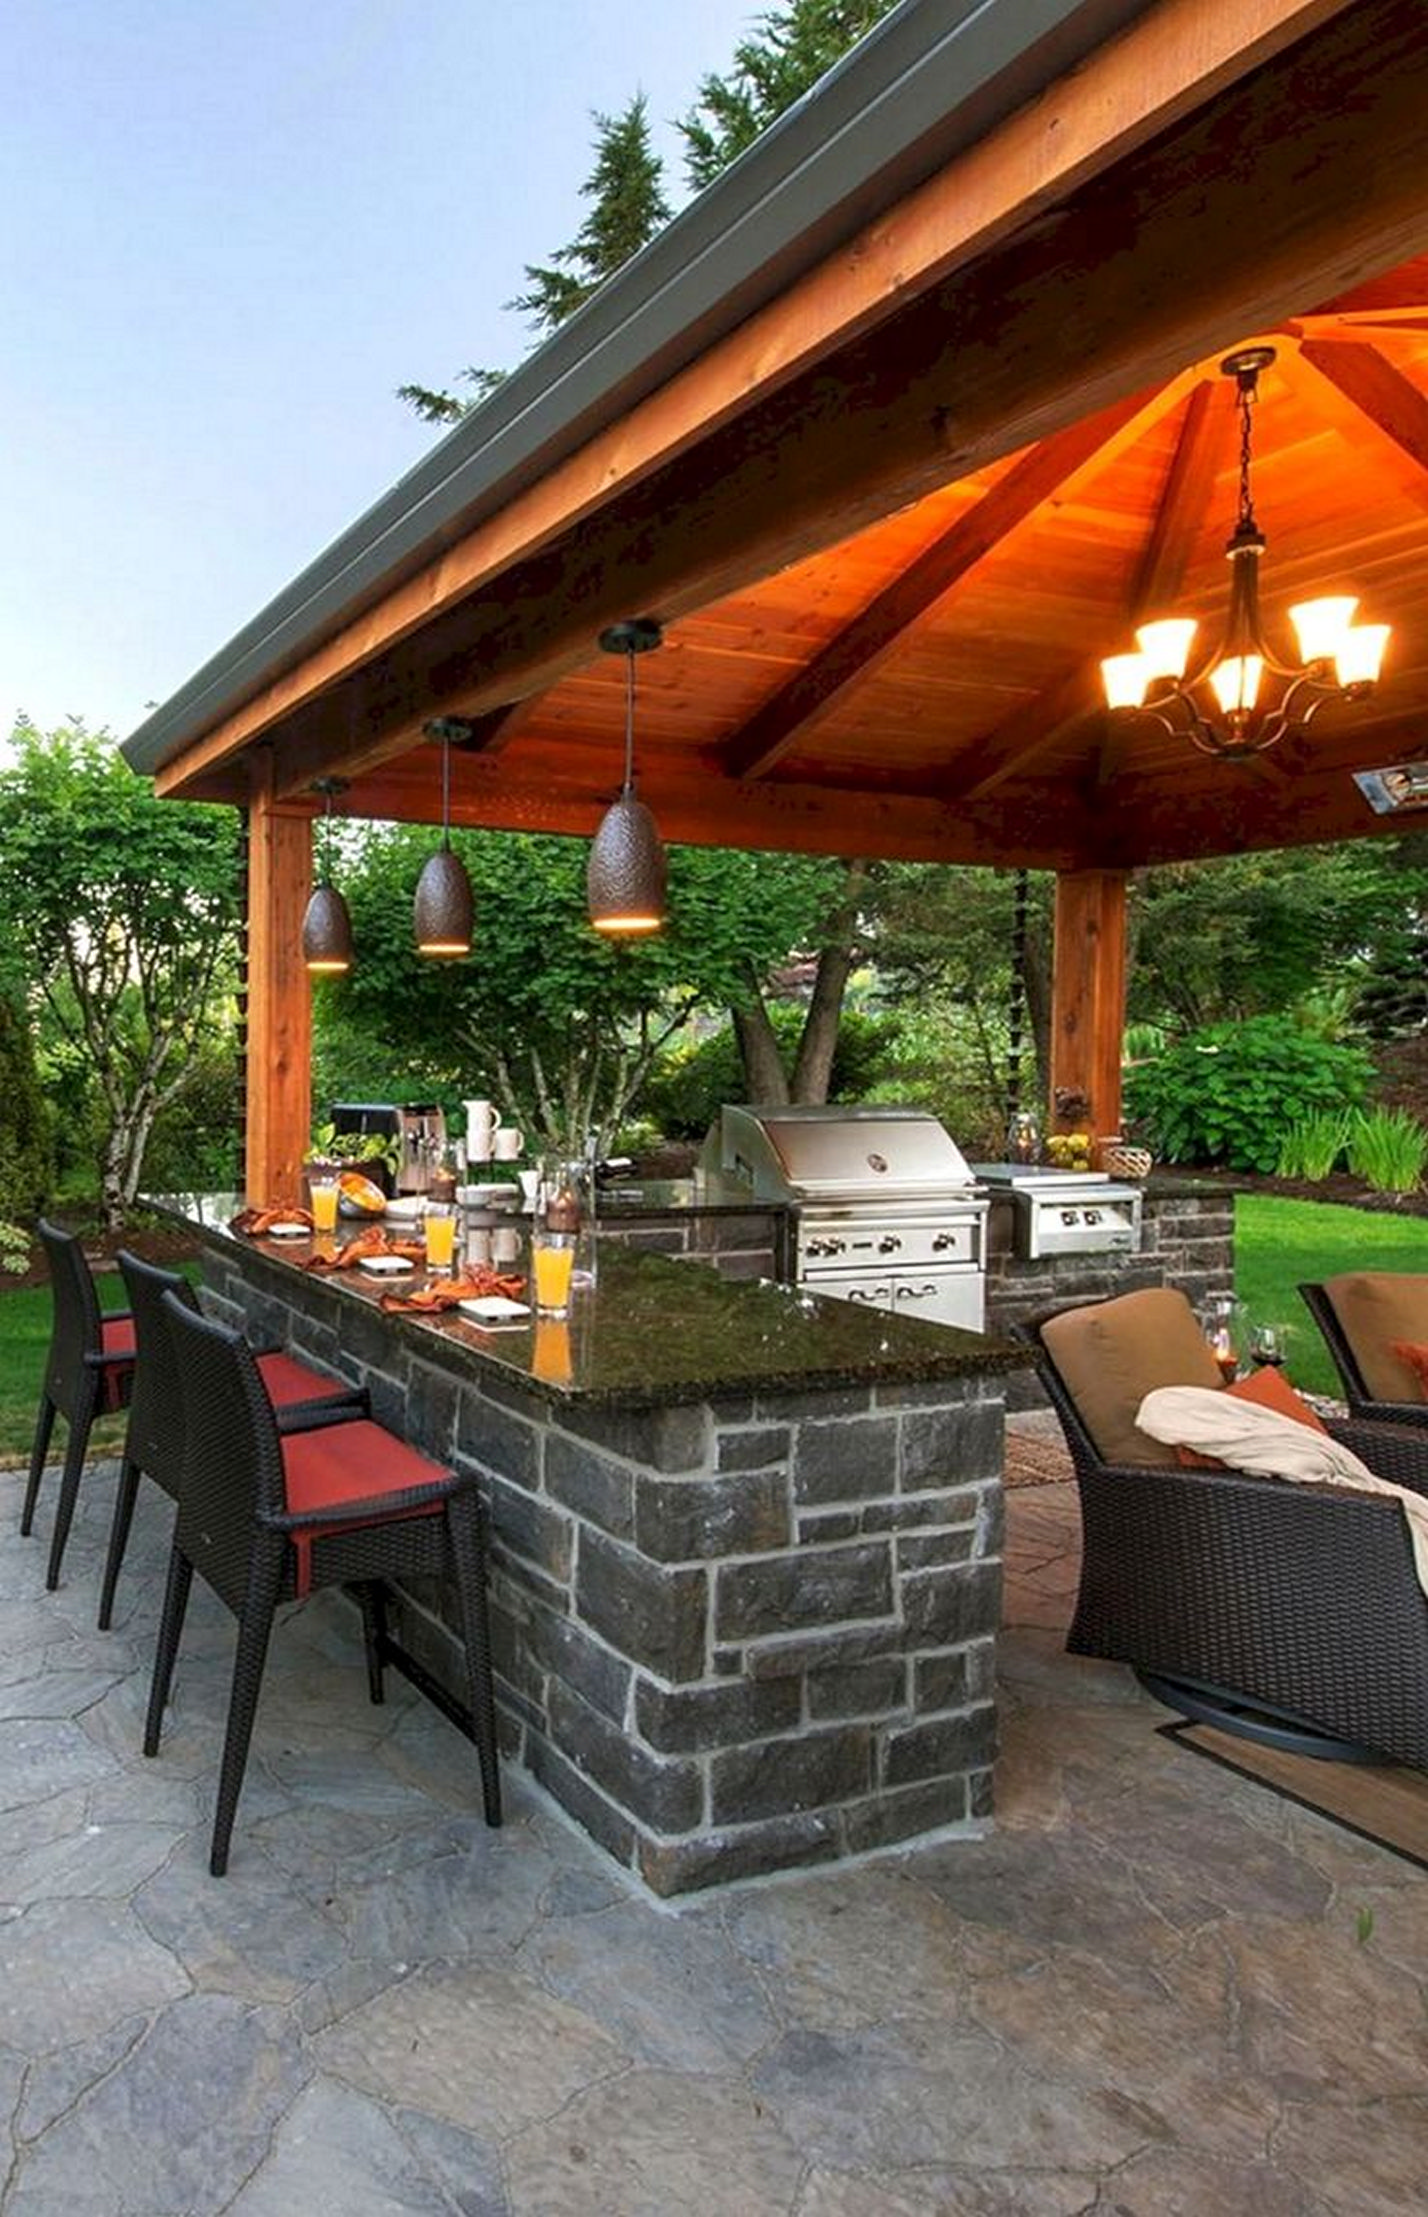 Attractive outdoor kitchen ideas for designing your most beautiful outdoor kitchen 11